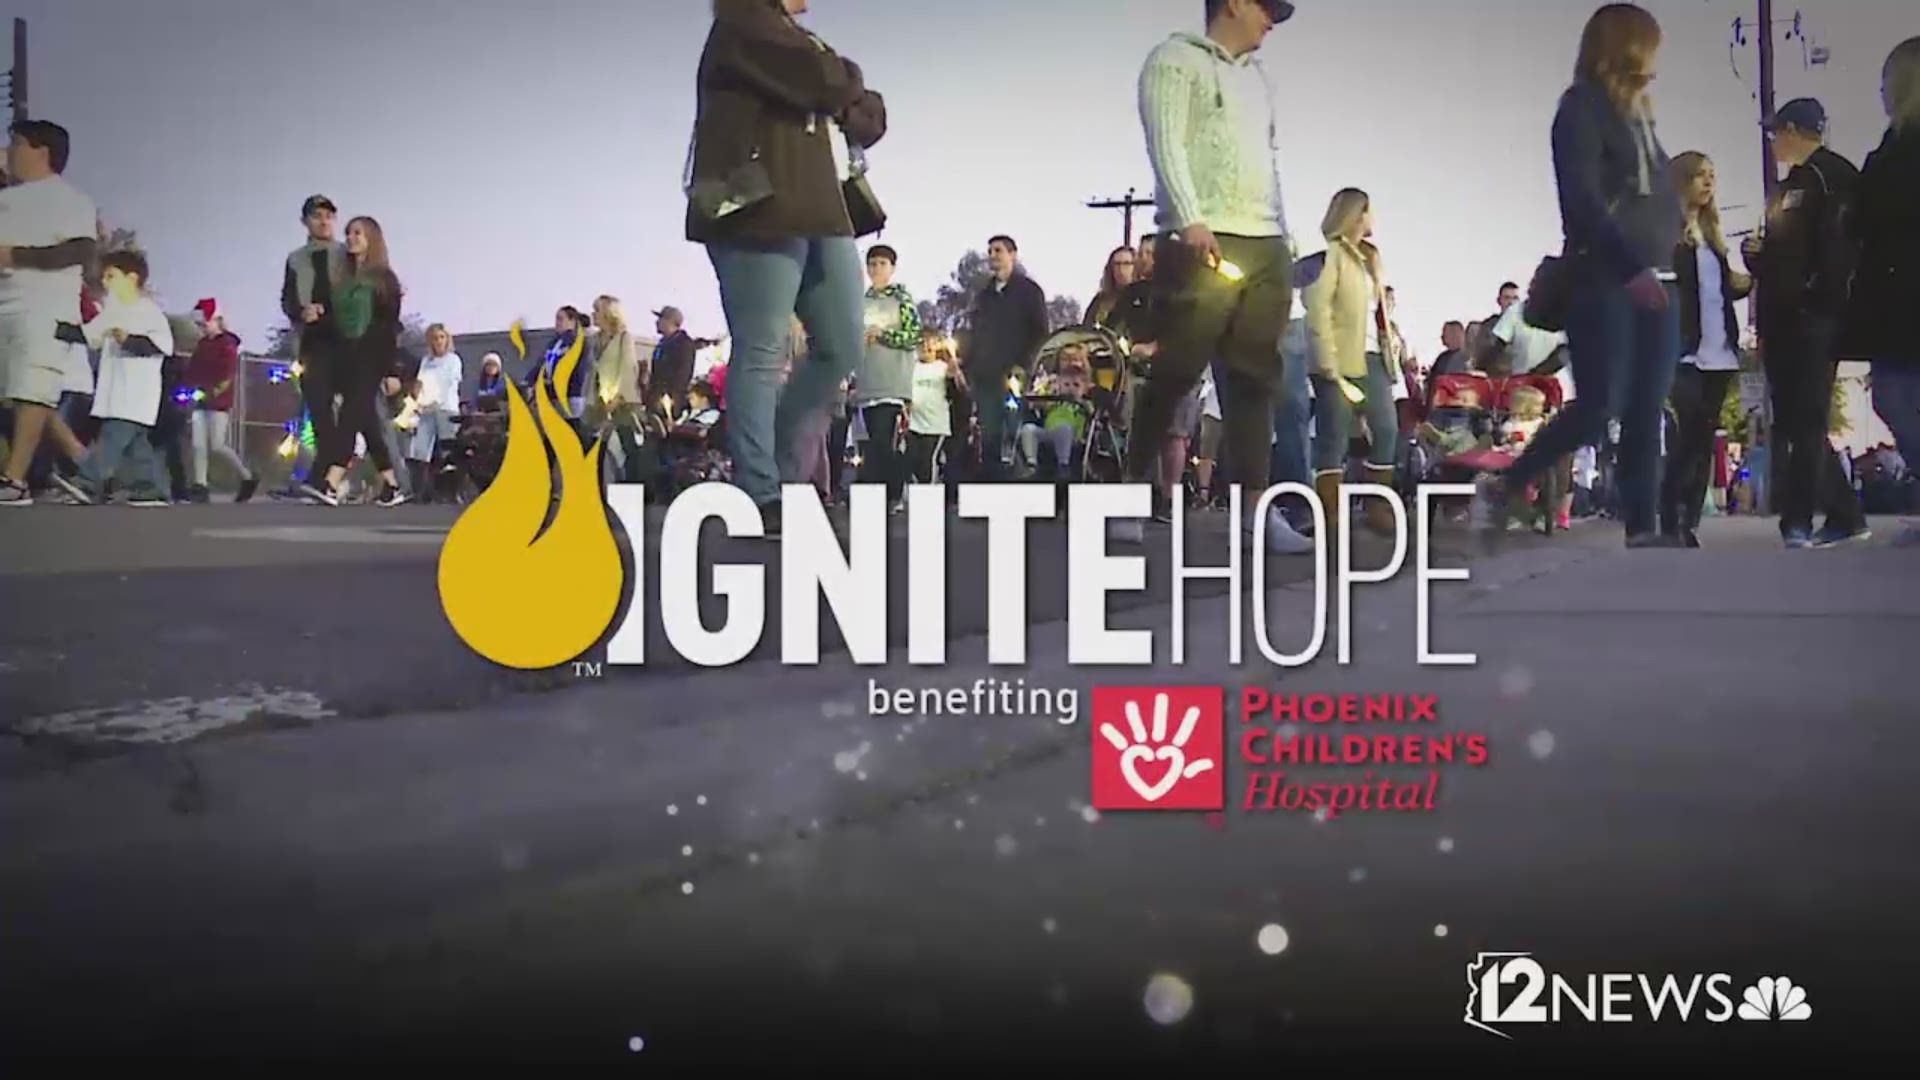 Join 12 News and Ignite Hope for Phoenix Children's Hospital.